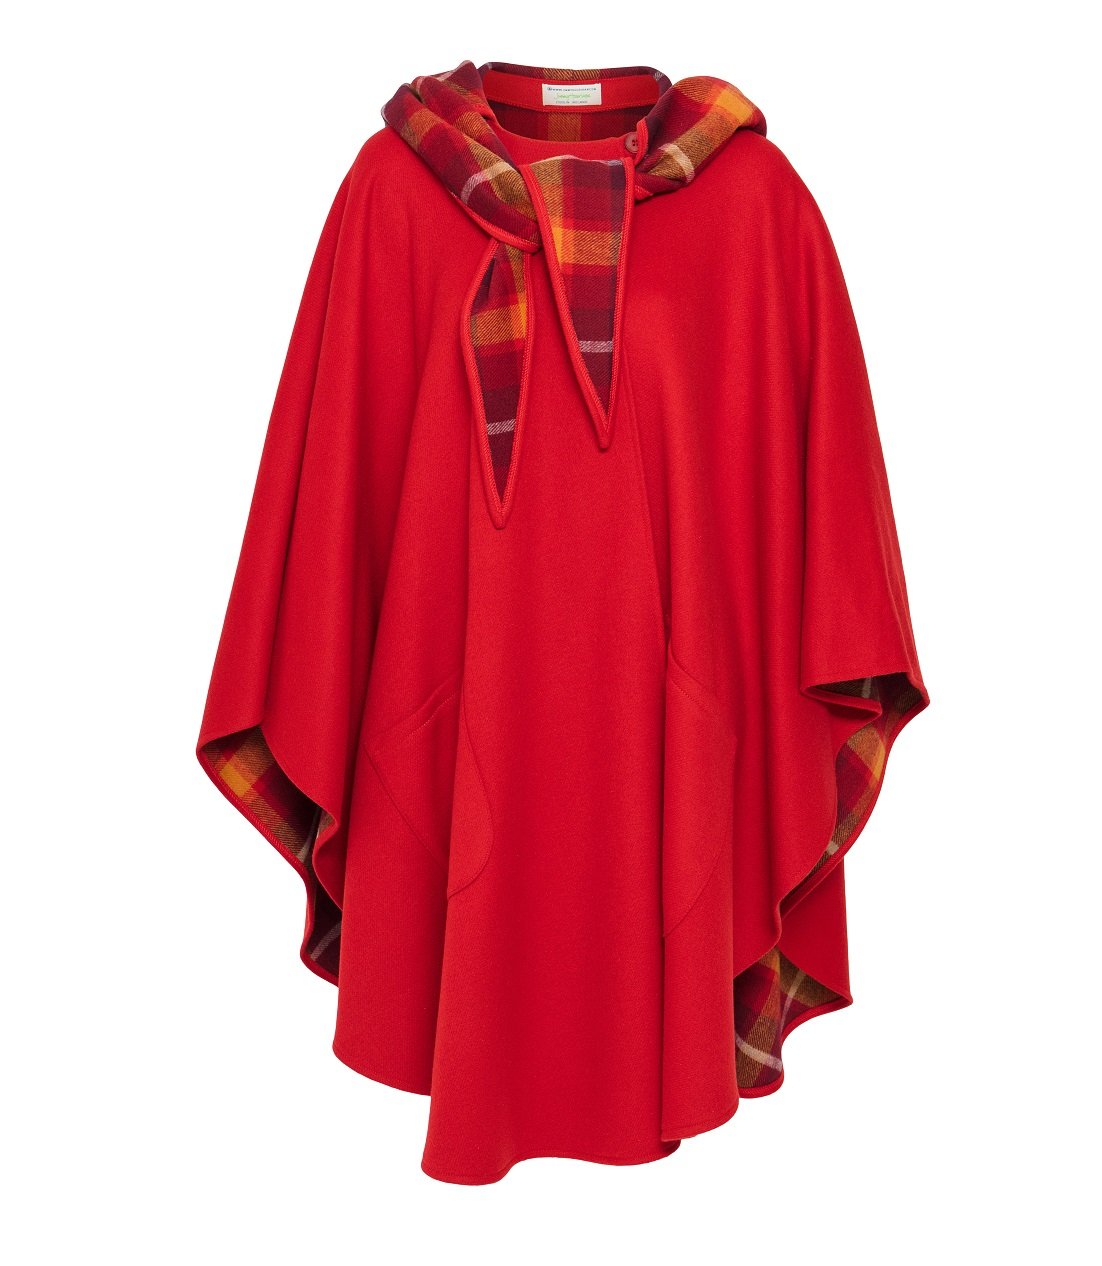 Jimmy Hourihan Classic Red Wool Walking Cape (No Pockets)